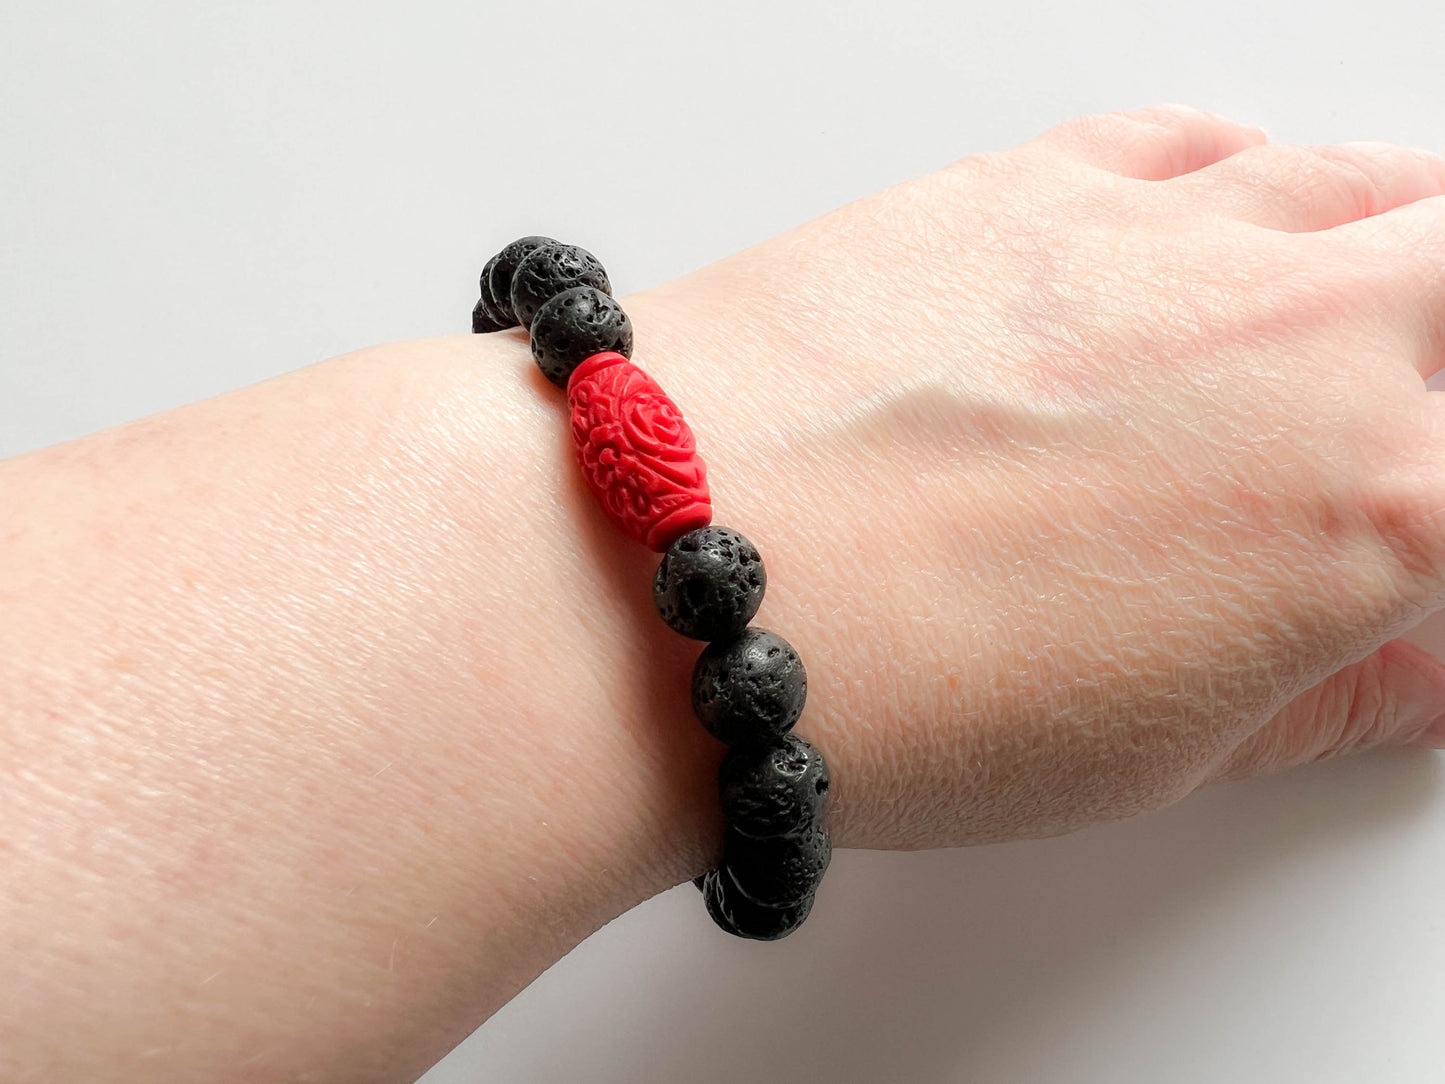 Black Lava stone and red flower bead bracelet - stretch - essential oil diffuser jewellery